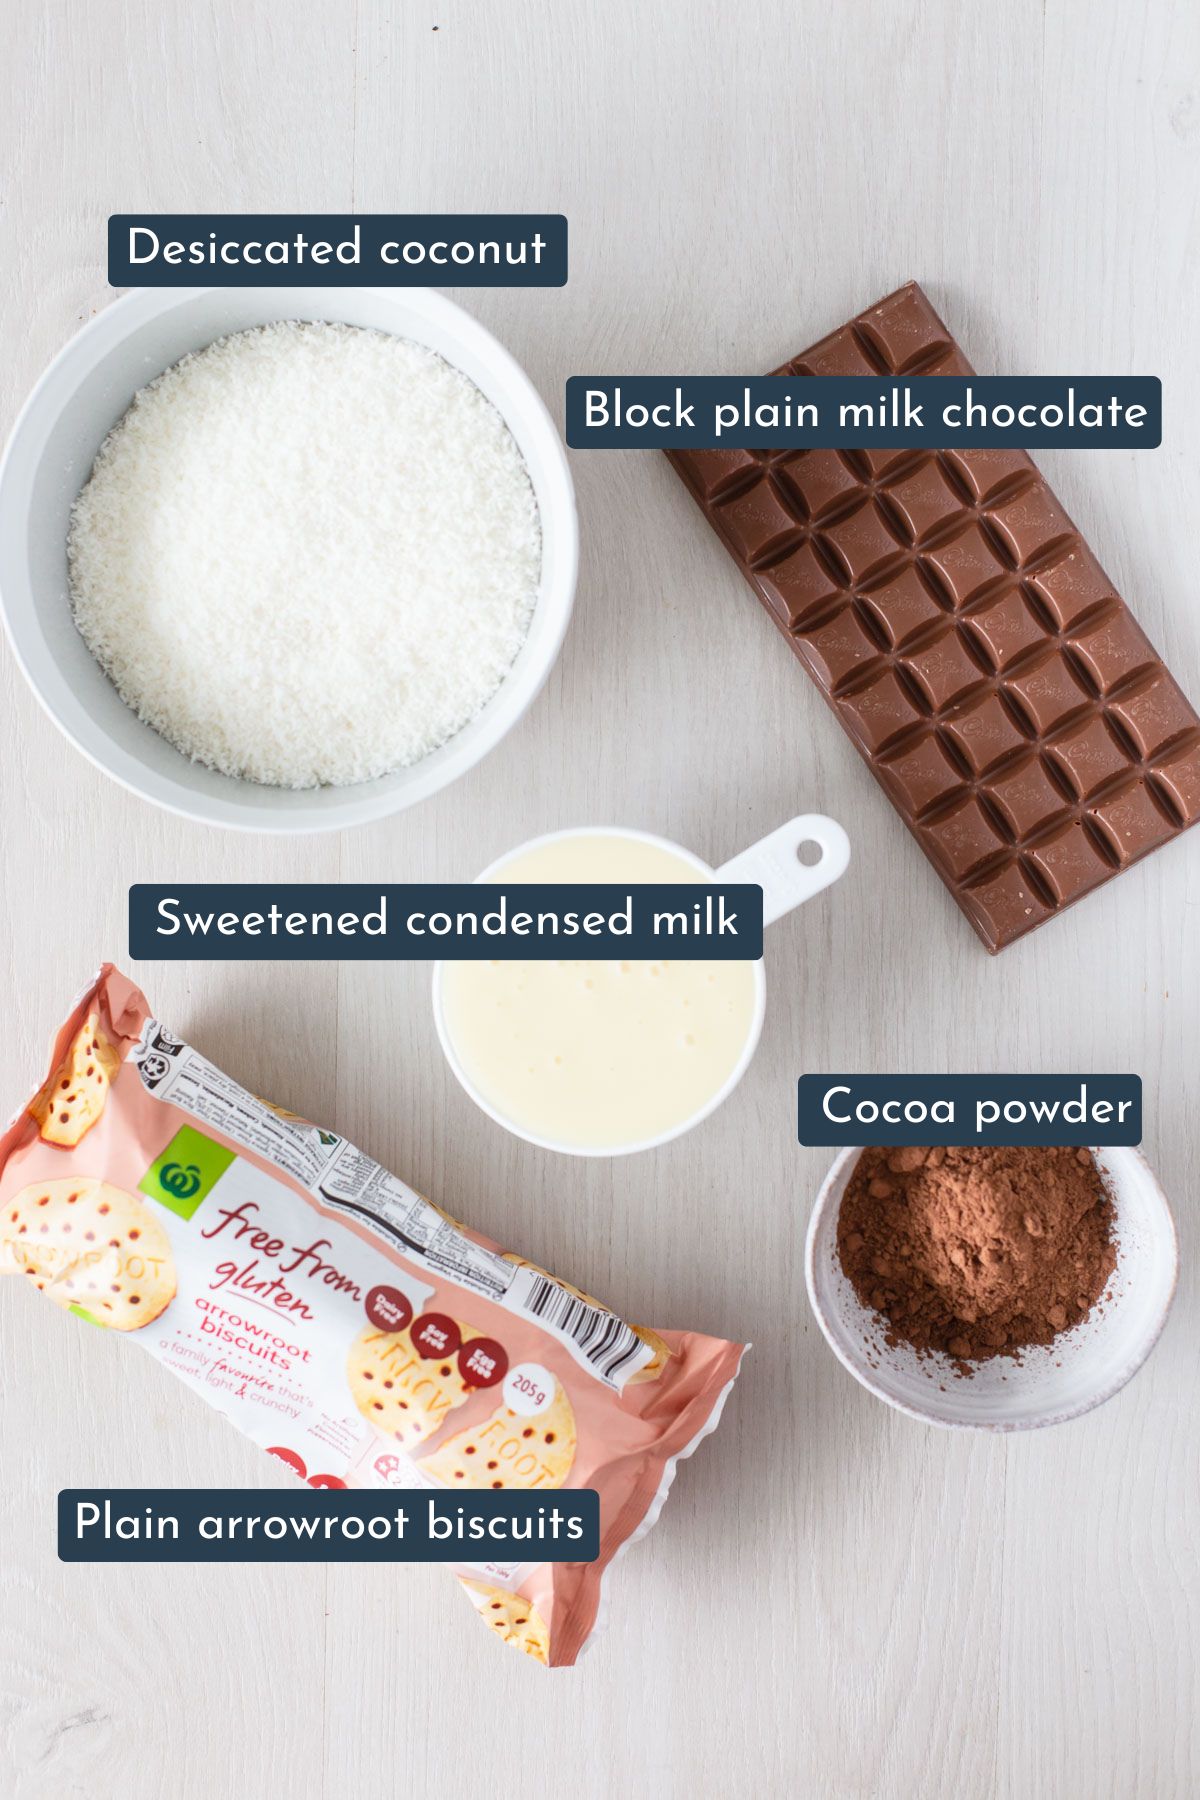 To make this recipe you need desiccated coconut, block of milk chocolate, sweetened condensed milk, cocoa powder and plain arrowroot biscuits.